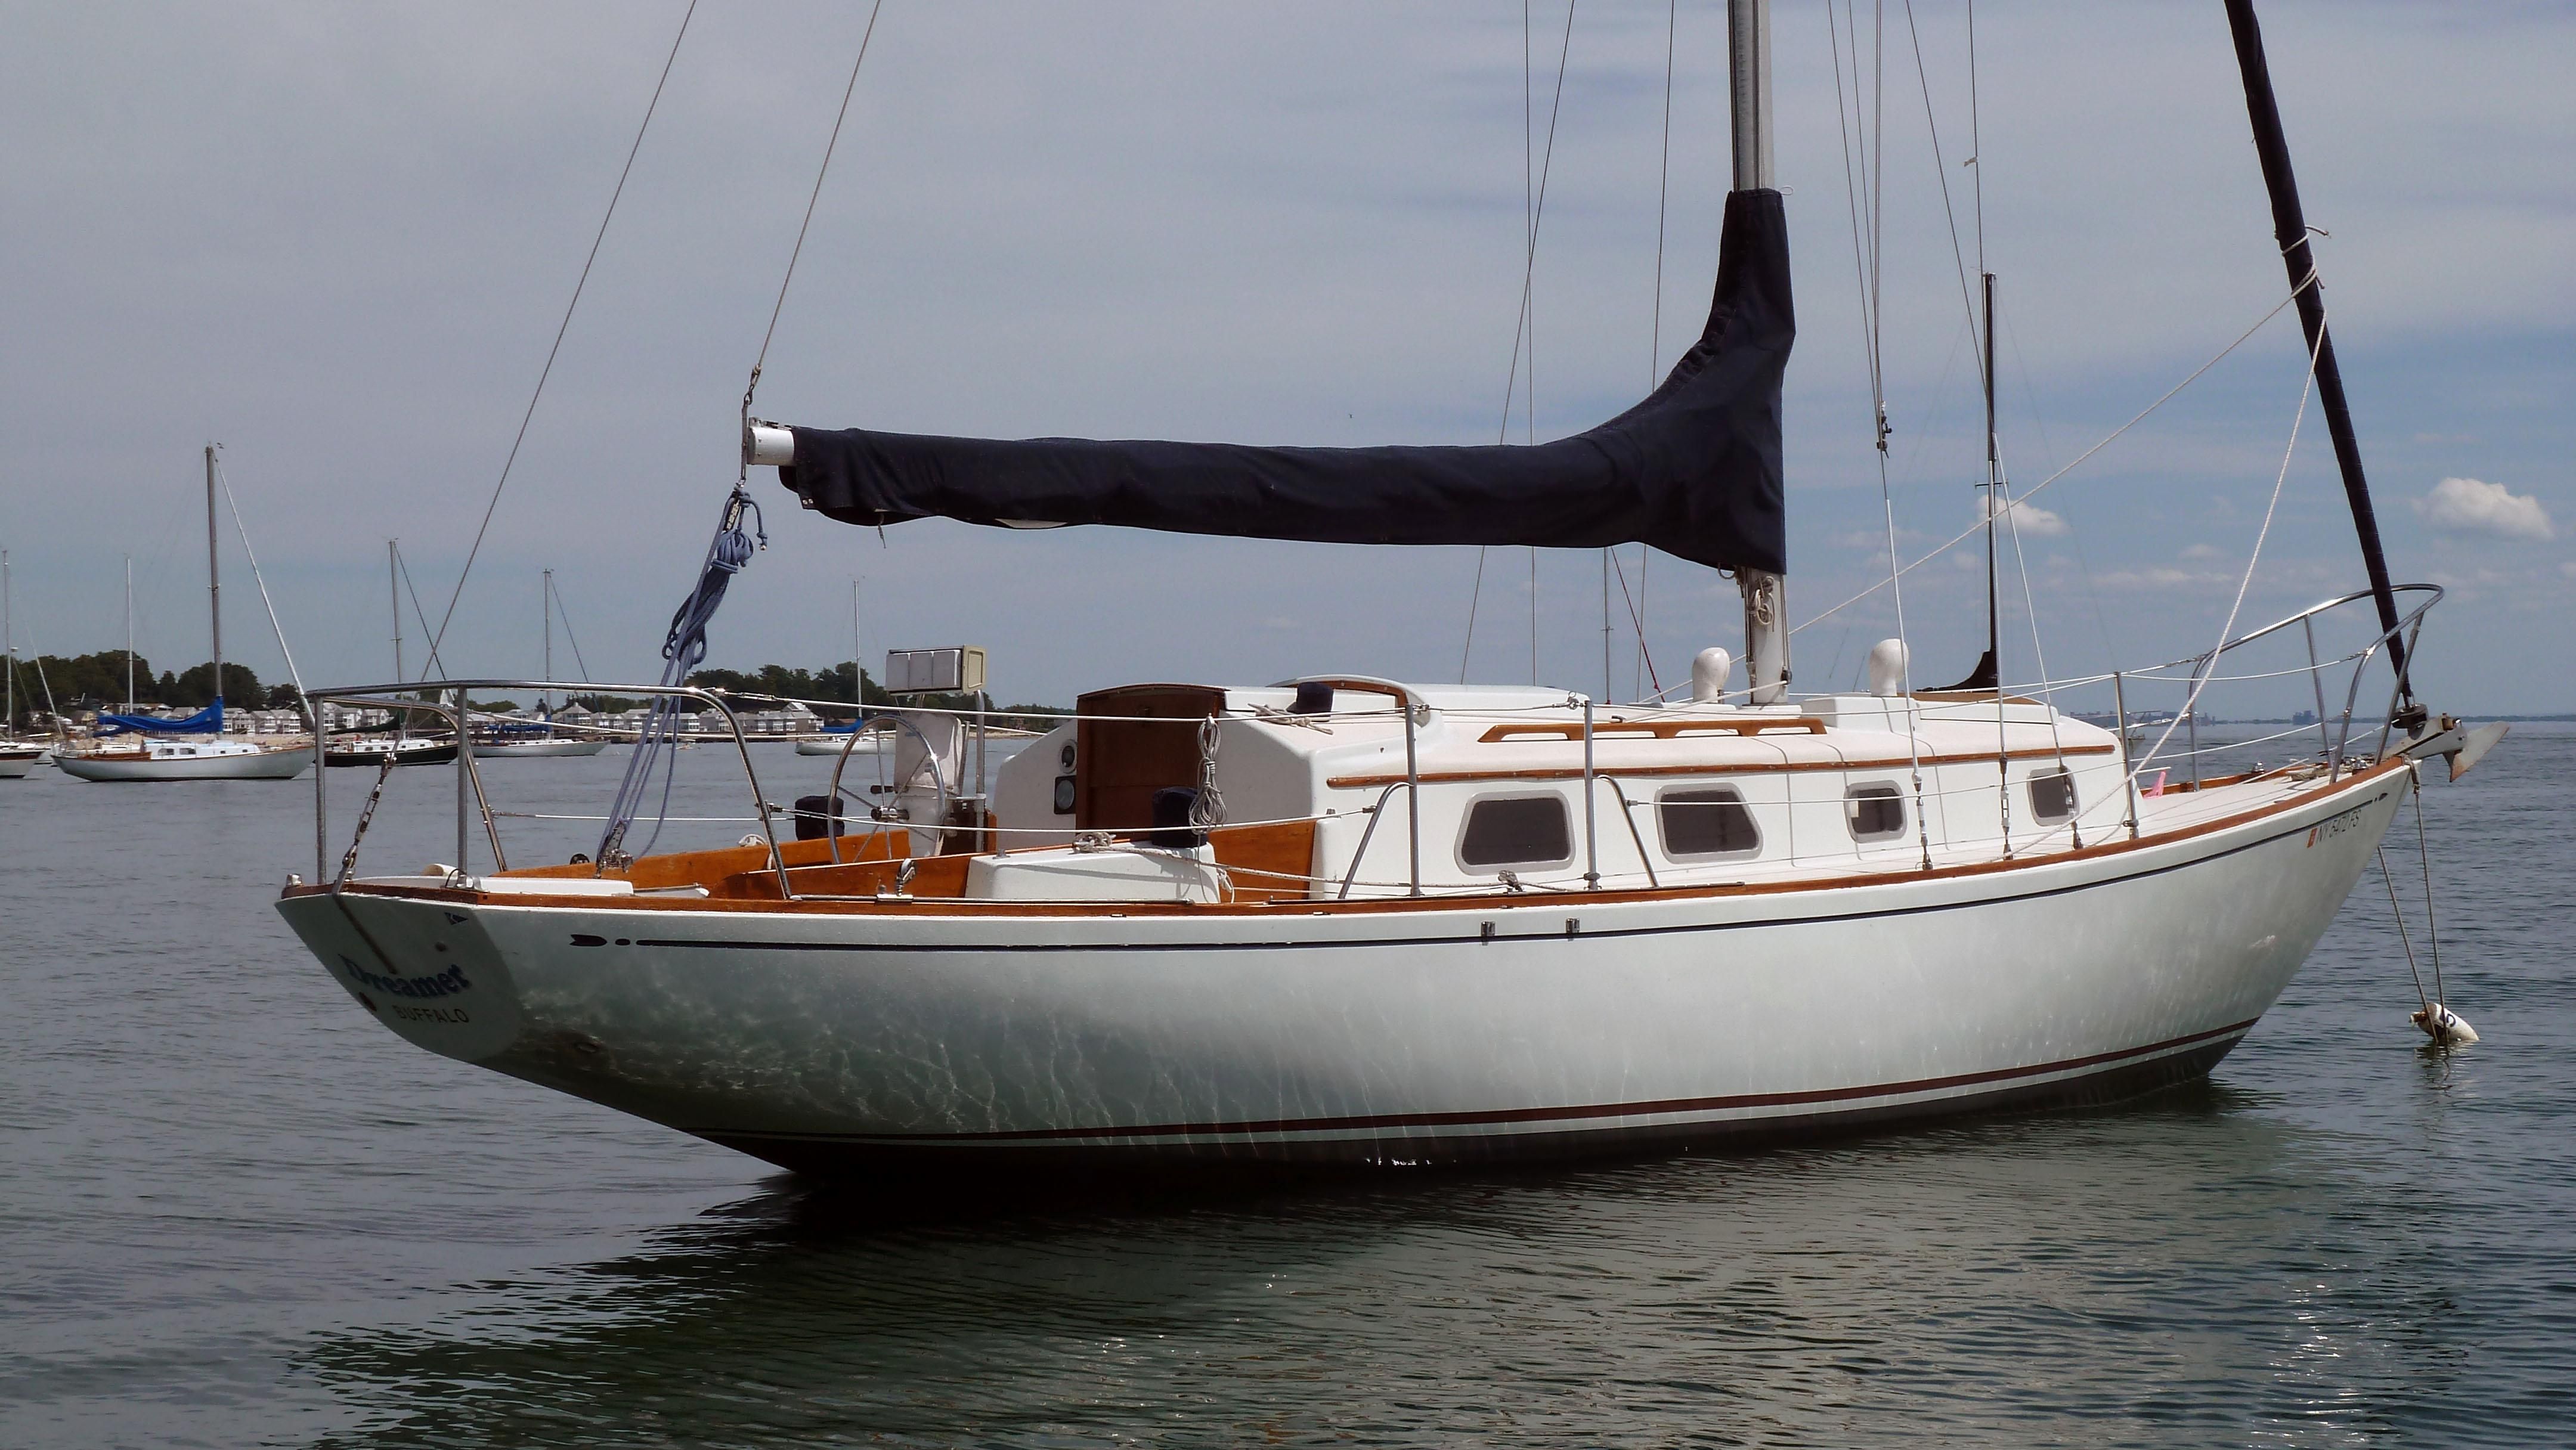 32 foot yacht for sale uk